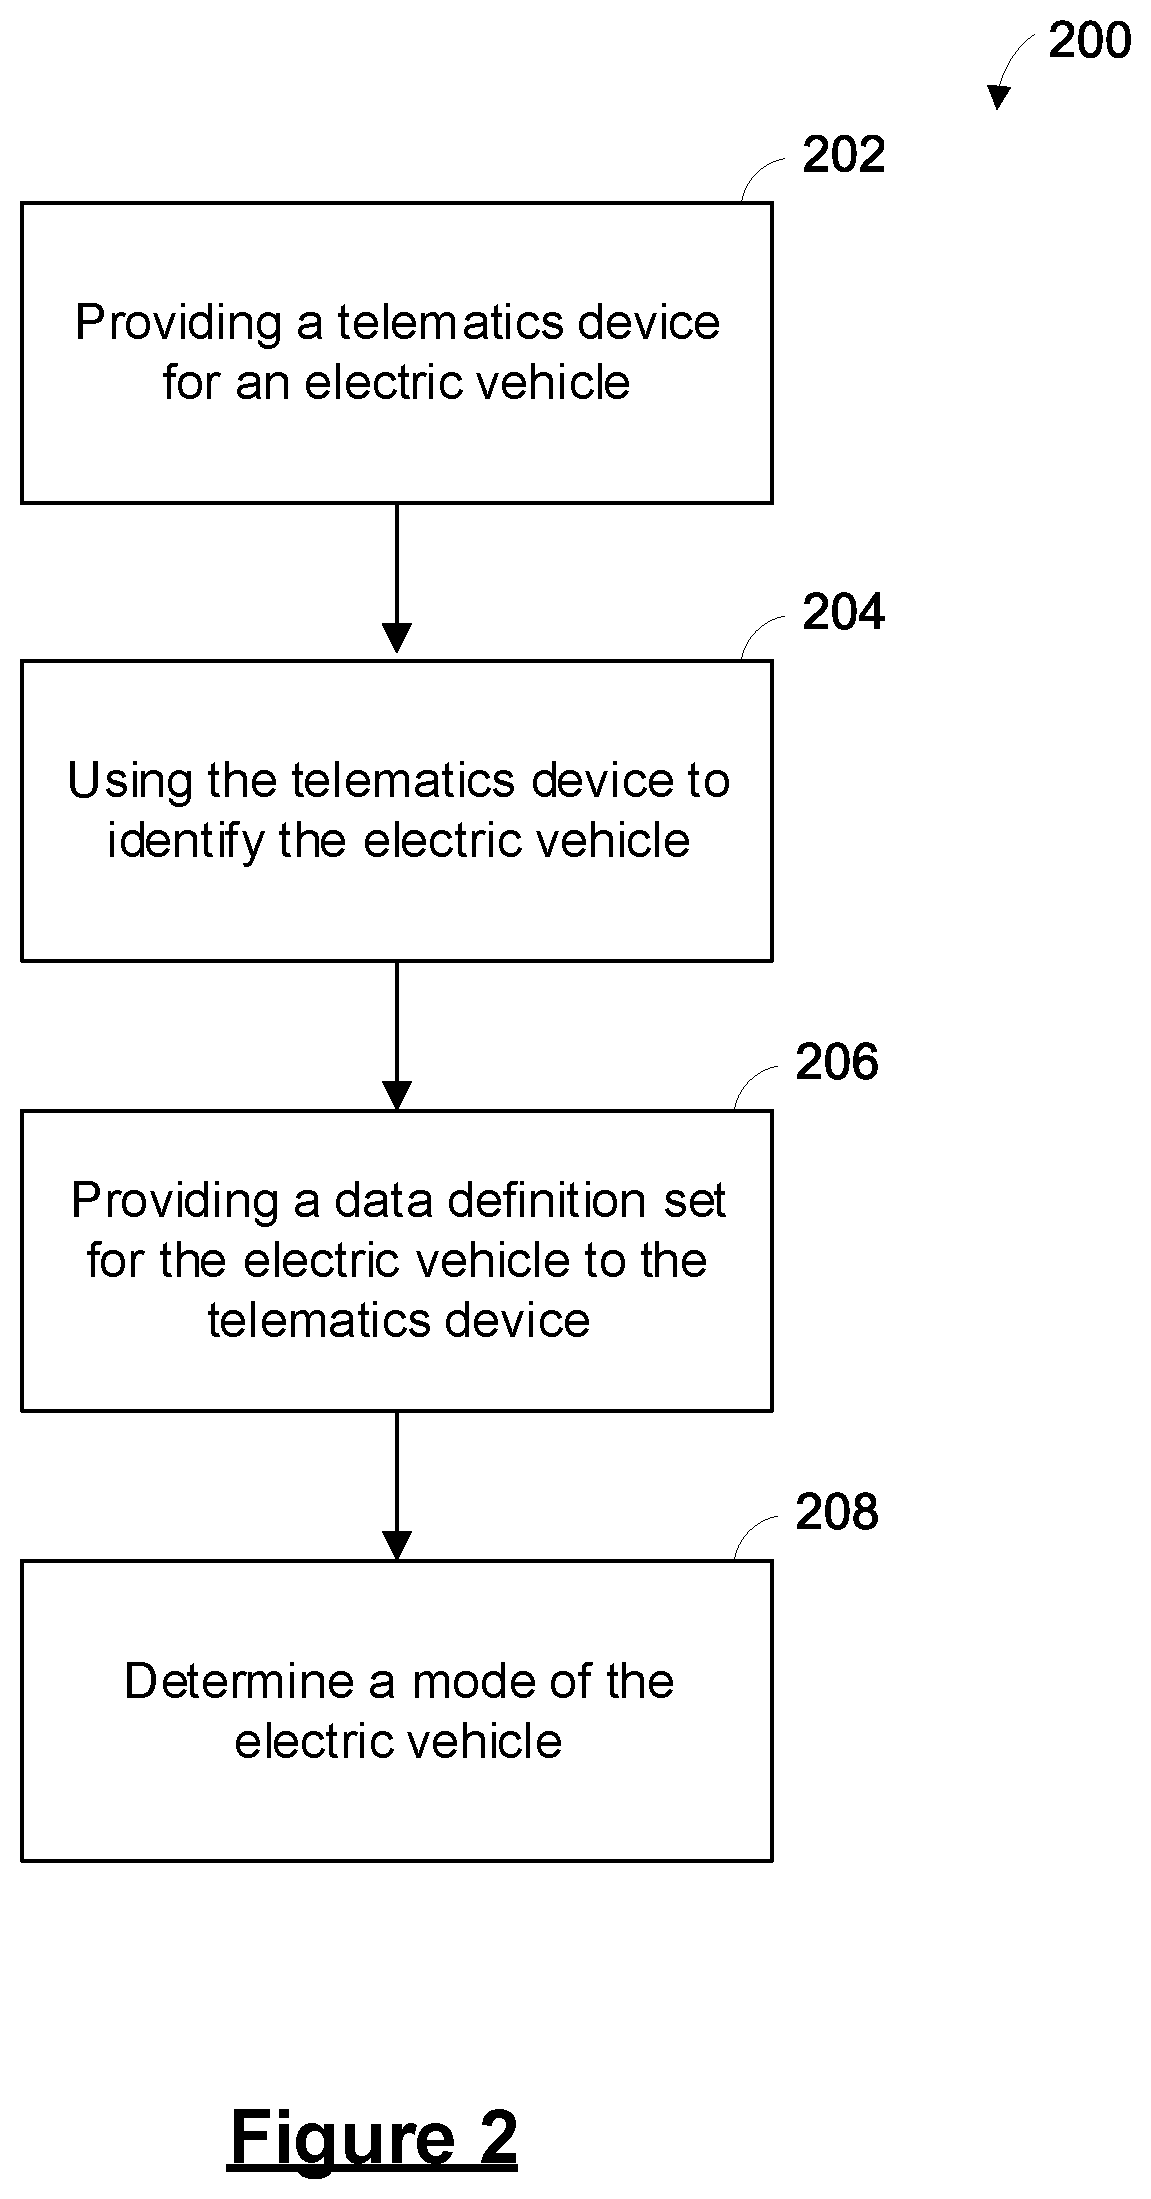 System and method for managing a fleet of vehicles including electric vehicles